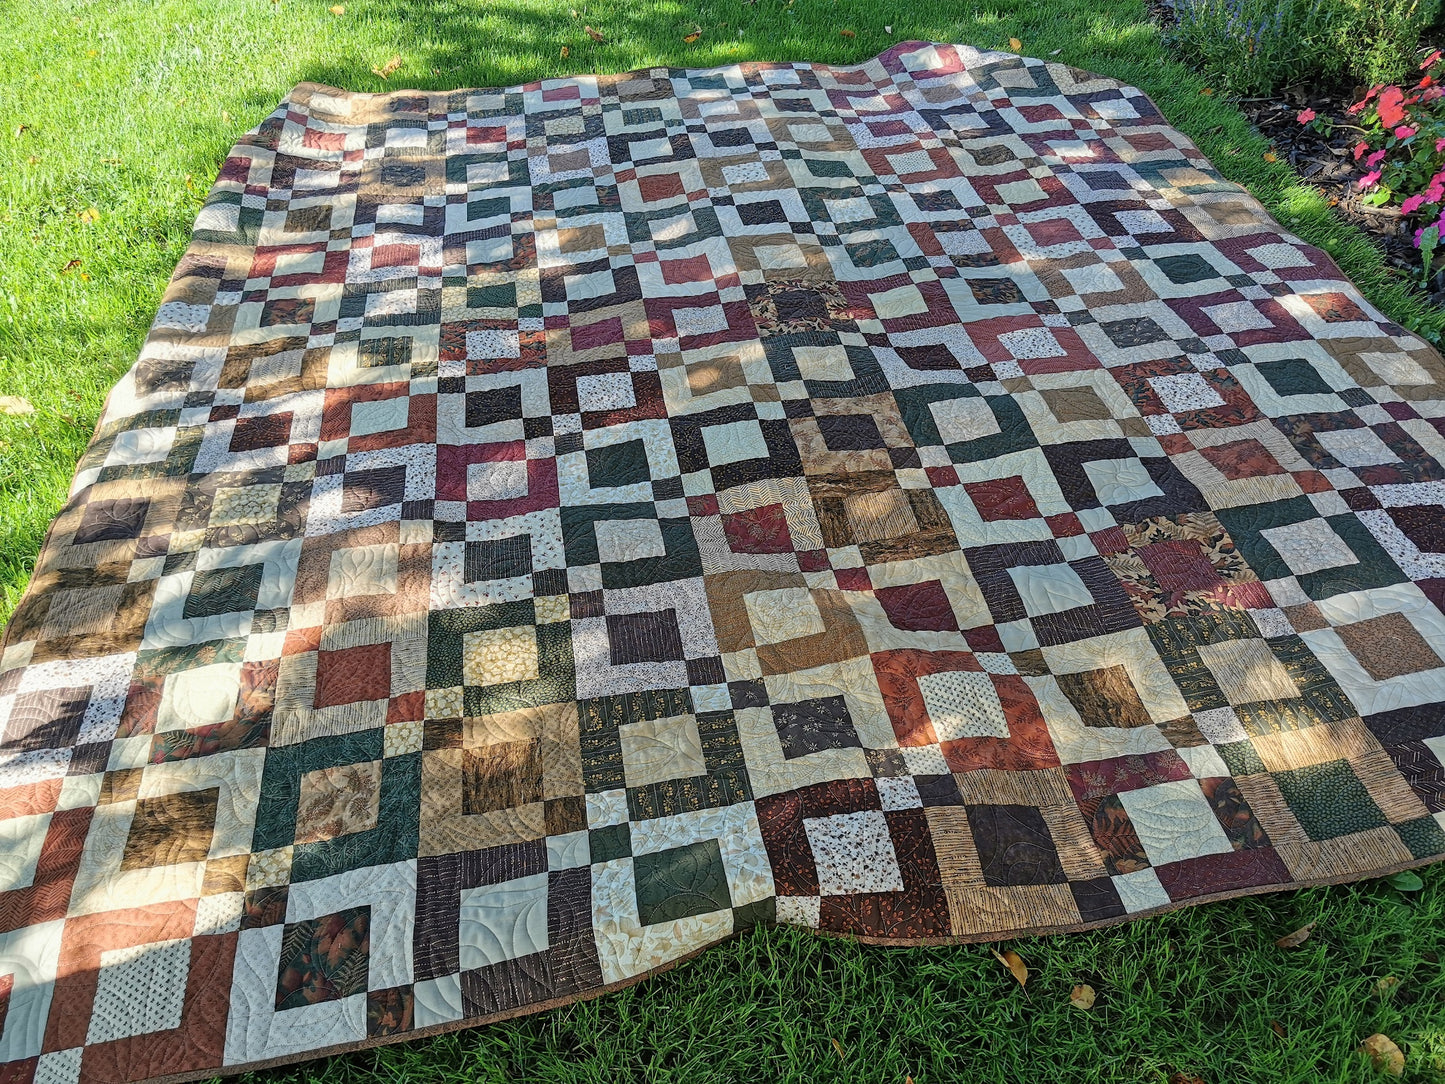 quilt shown outdoors on the grass in dappled shade.